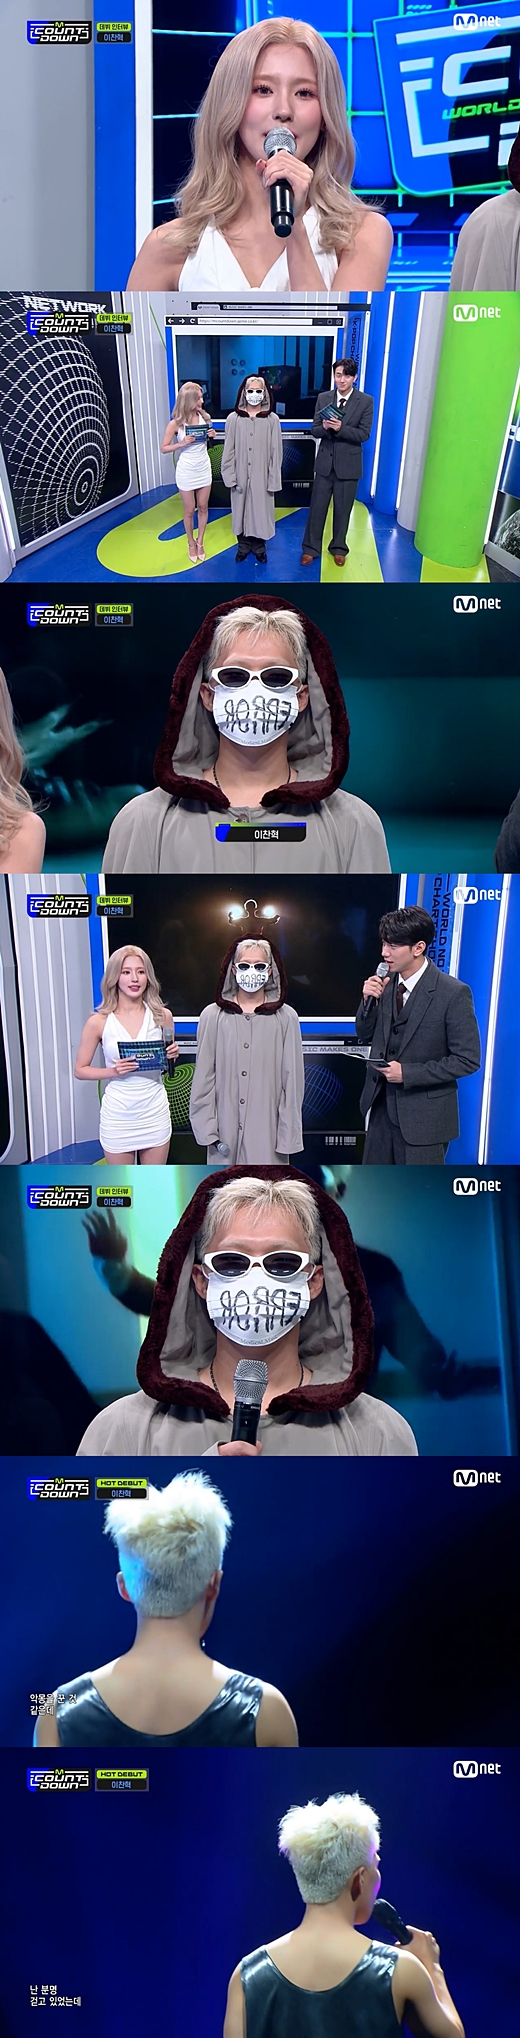 Lee Chan-hyuk (26), a member of the brother and sister duo AKMU, performed a unique performance today.Lee Chan-hyuk opened a new song Panorama on MBC Show Show! Music Core broadcast on the 22nd.On this days broadcast, individual interviews did not go on, and Lee Chan-hyuk on stage sang without turning his head like the last stage.Instead, through a mirror installed behind the stage, the audience could see Lee Chan-hyuks face.Lee Chan-hyuk appeared on the cable channel Mnet M Countdown which was broadcast on the 20th, and showed the stage with Solo debut Interview.Lee Chan-hyuk, however, appeared in a mask with ERROR in an interview with MCs, and Silence did not answer any questions from MCs.Lee Chan-hyuk stared at the front while wearing sunglasses, and when he heard the microphone, he did not answer.The Panorama stage was also unusual: Lee Chan-hyuk turned his back on Camera and sang. Lee Chan-hyuk sang without turning to the front until the song was over.Since the broadcast, online criticism of genius and rude has been poured at the same time.